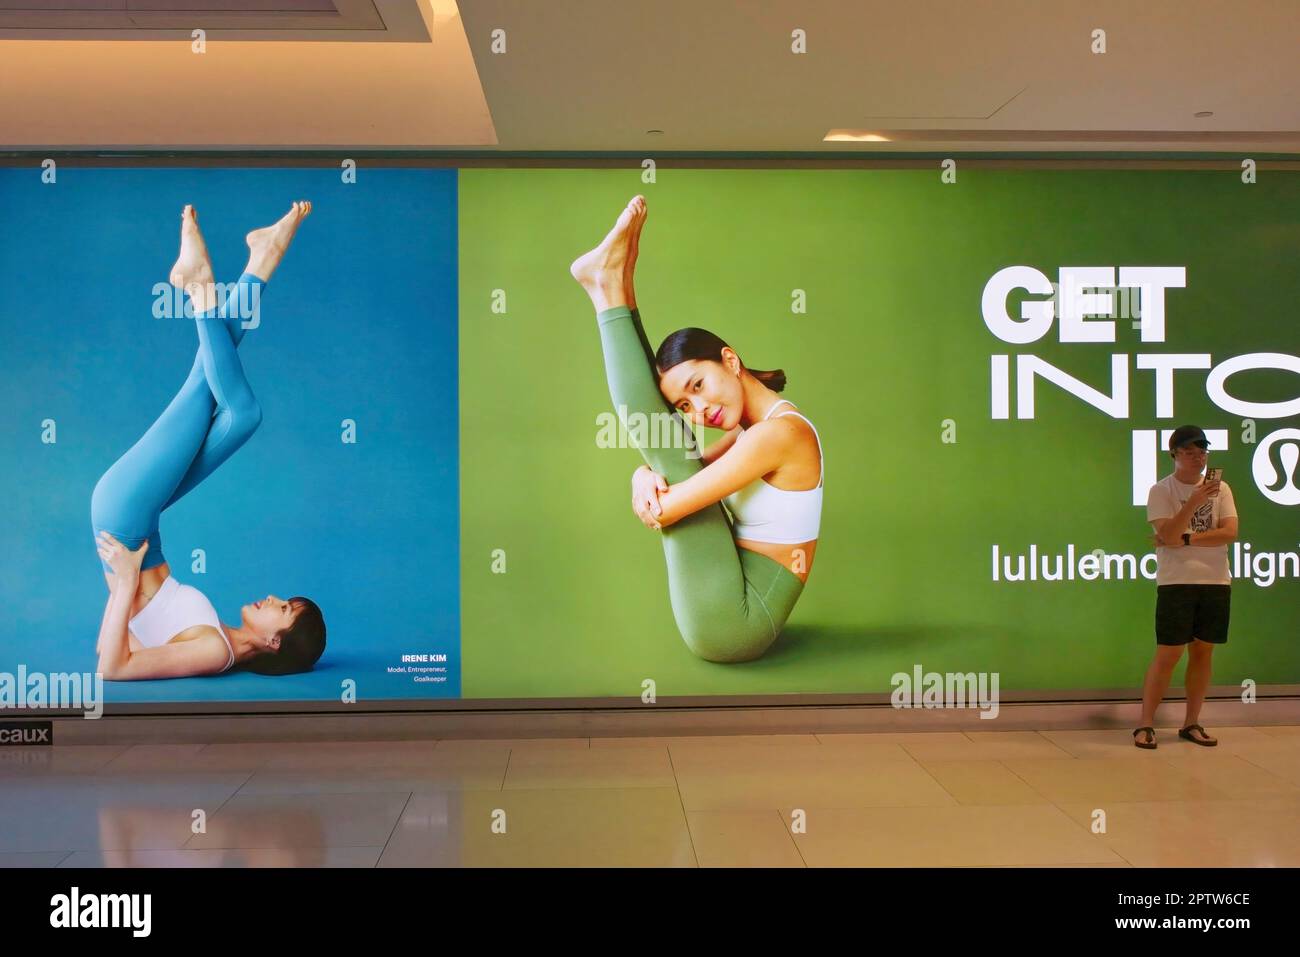 At ION Orchard (mall), Orchard Road, Singapore, a young man stands in front of yoga-themed advertisements for co. 'lululemon' selling athletic apparel Stock Photo